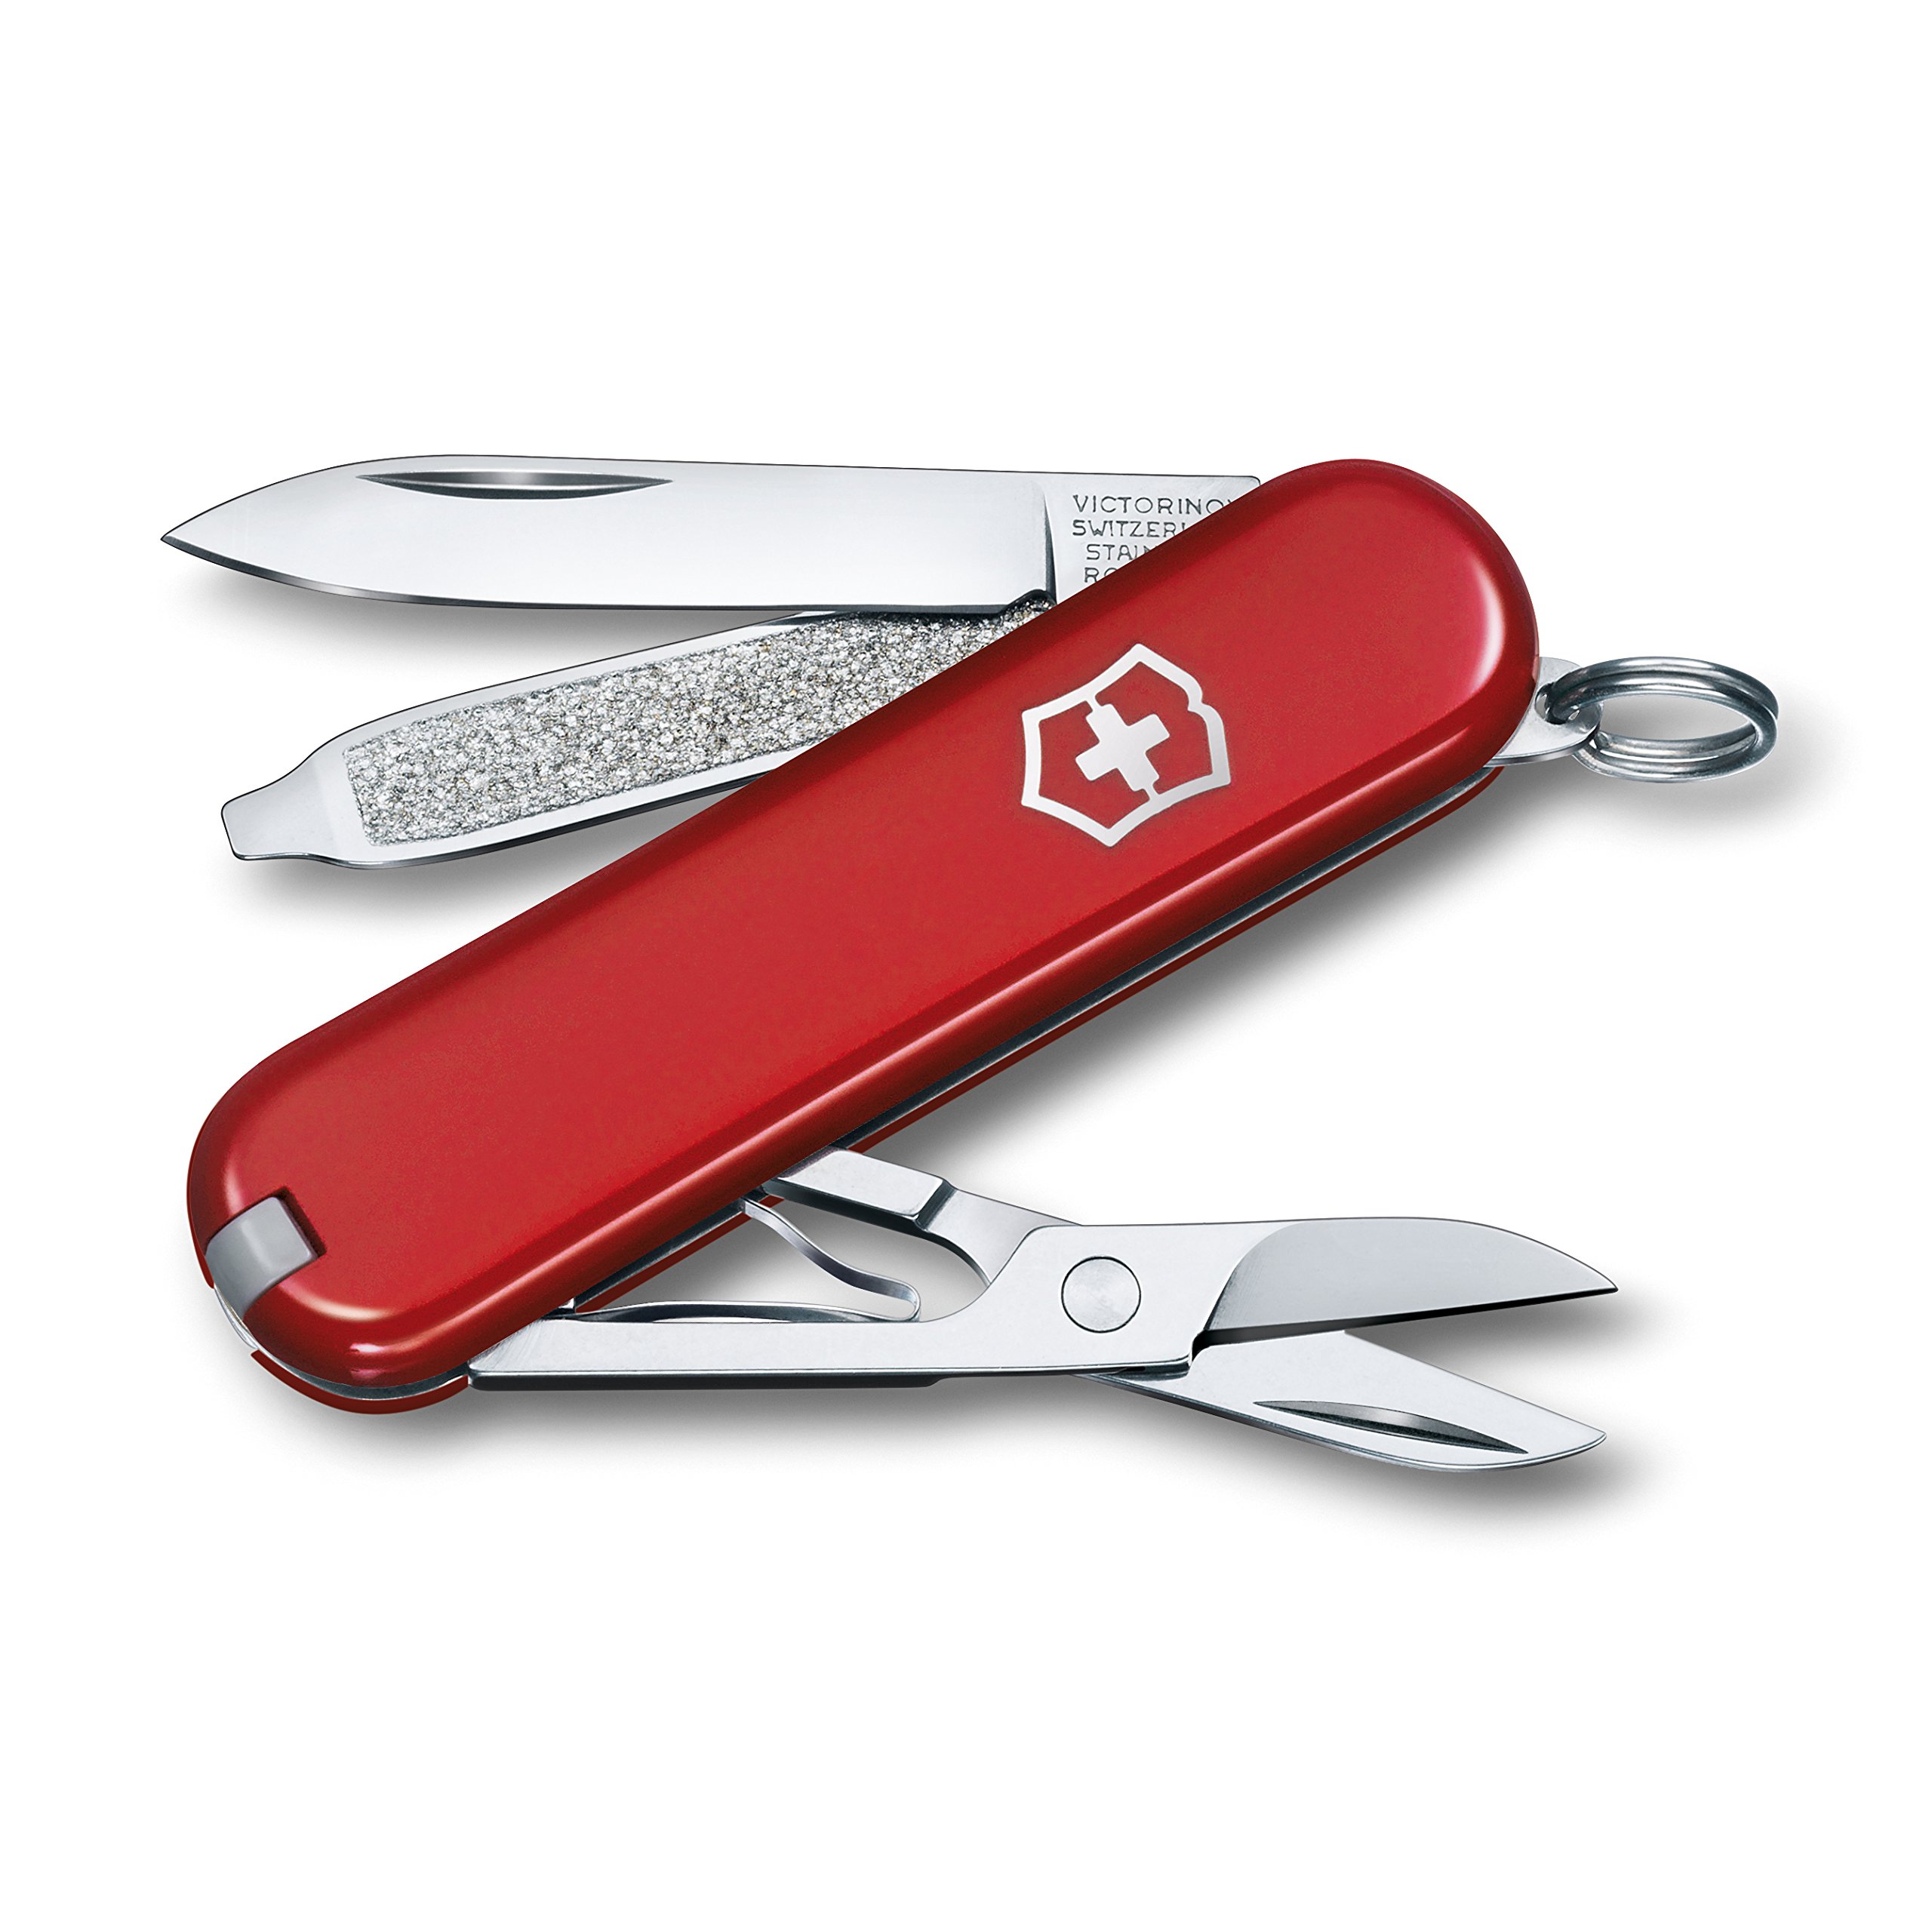 Swiss Army Victorinox Classic SD Pocket Knife - Red - (Open Box)